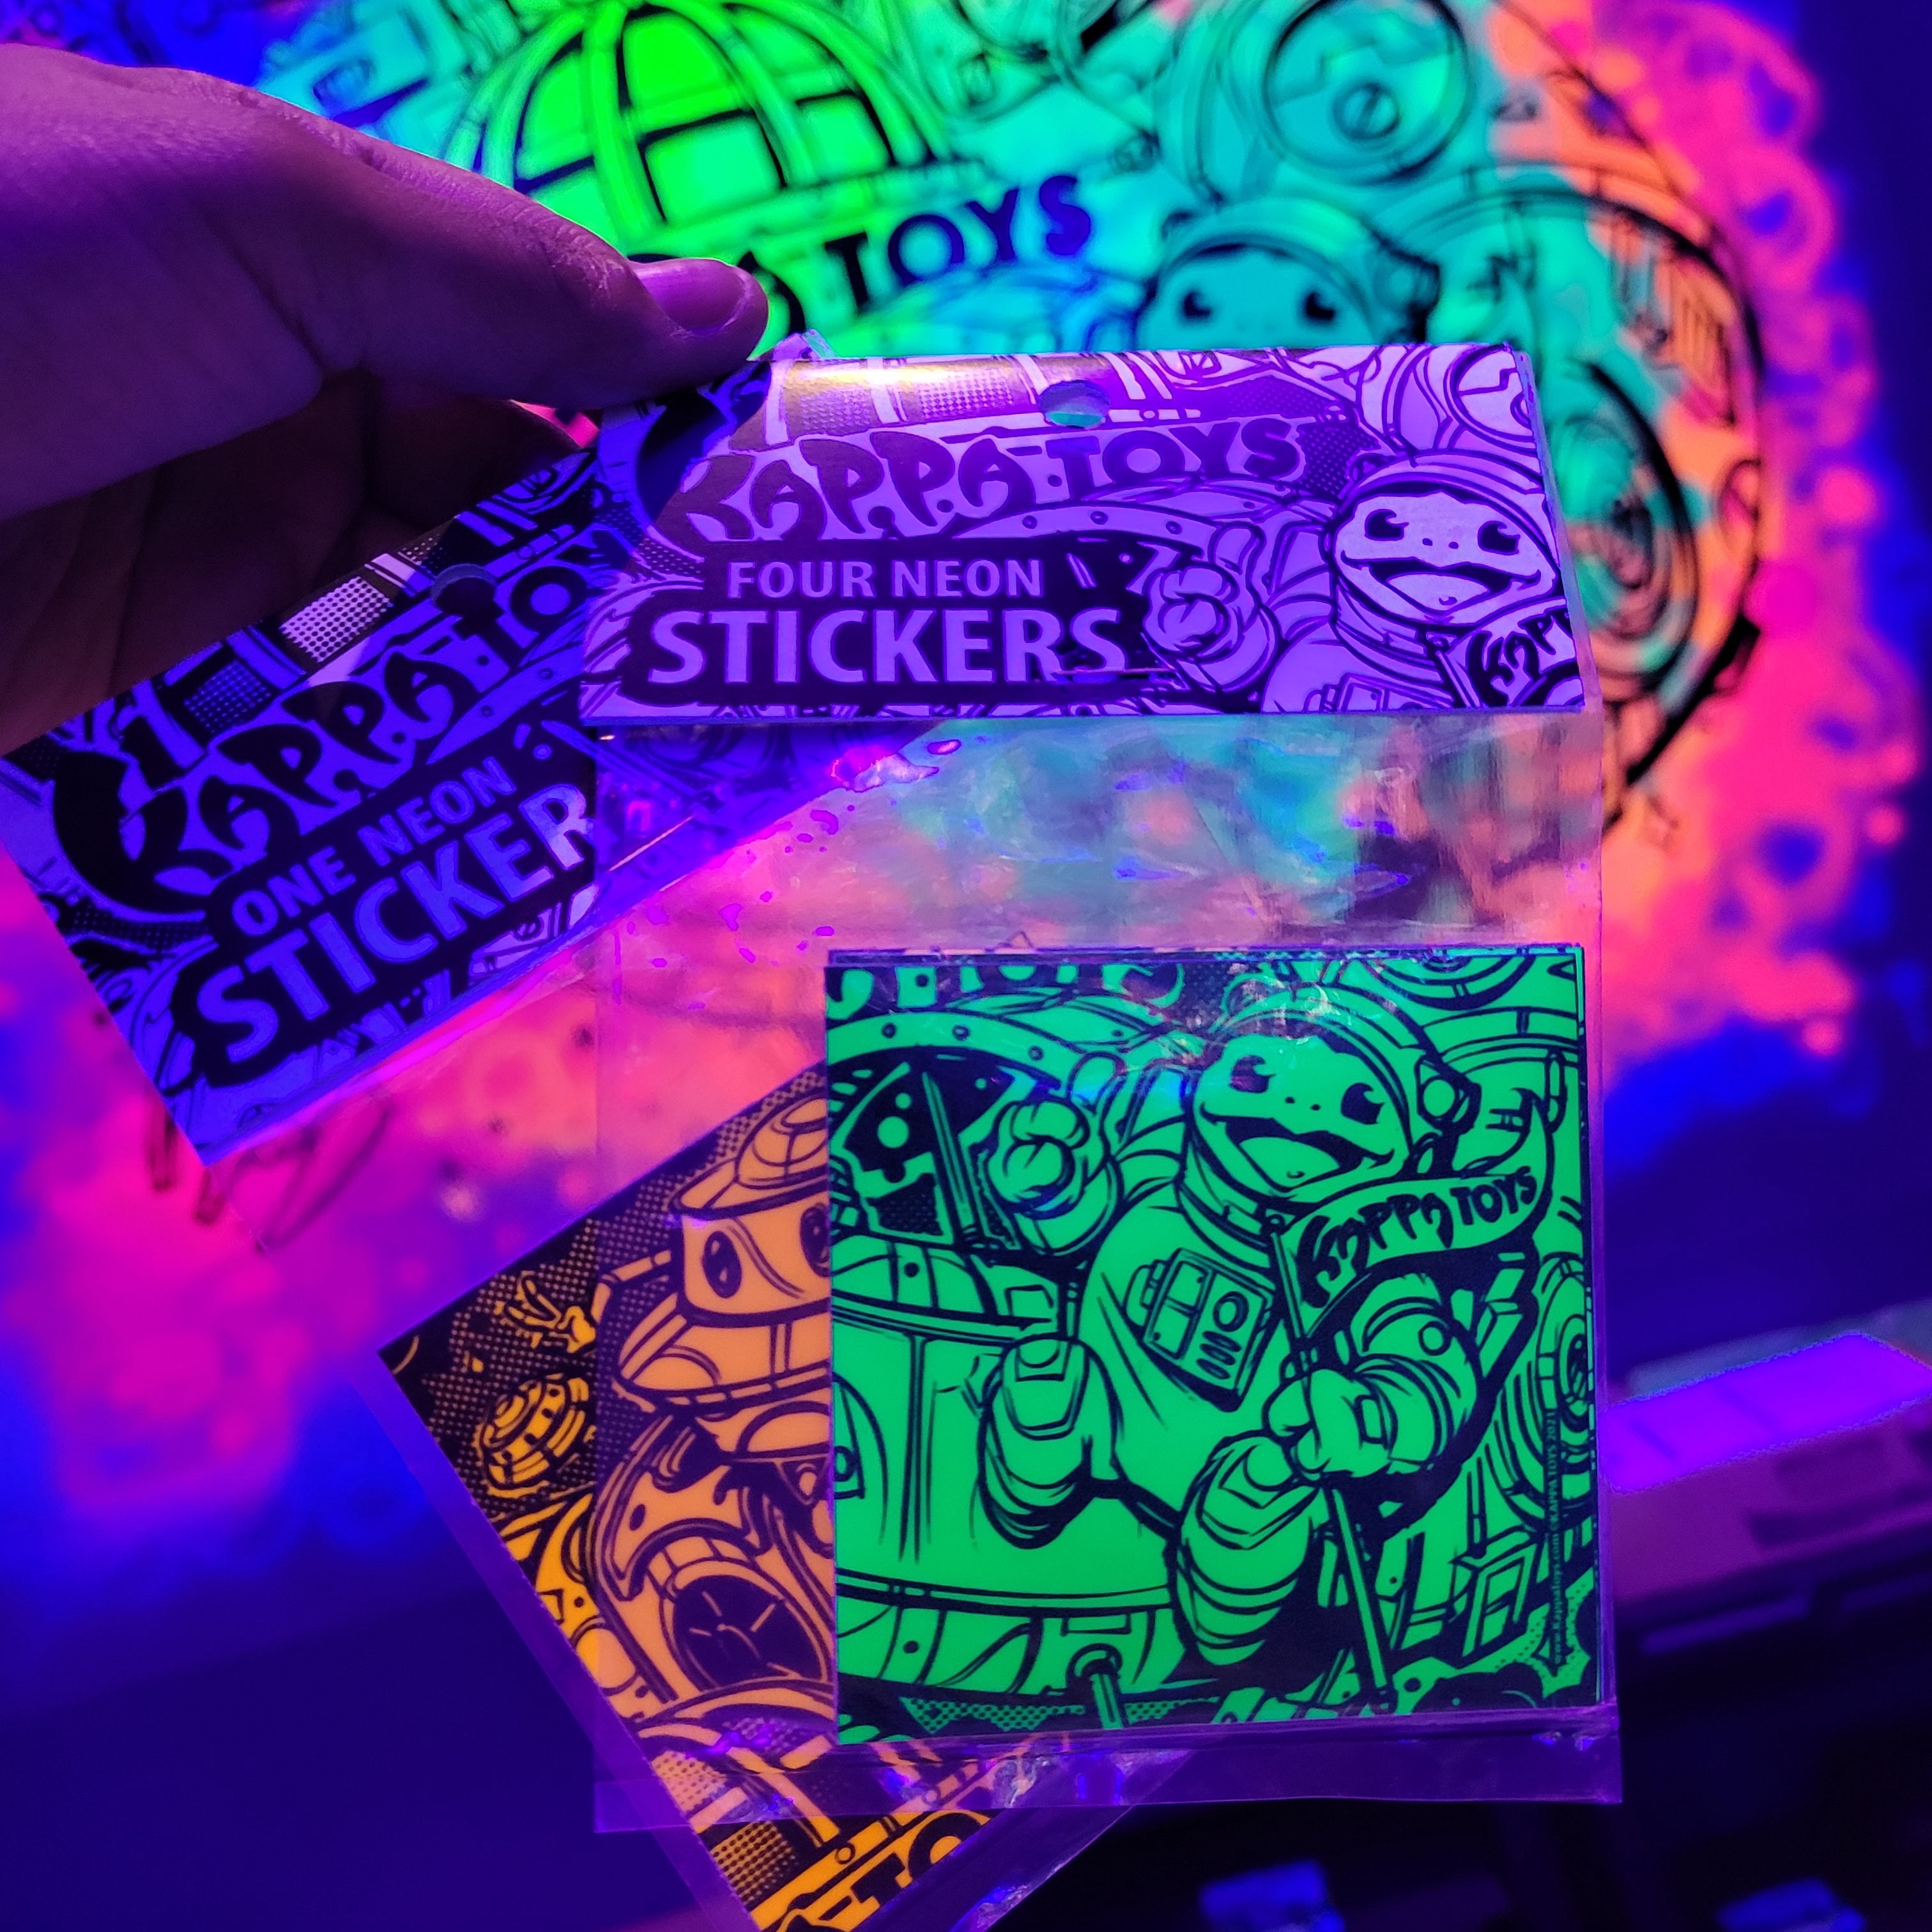 Kappa Toys Neon Stickers - 1 Pack